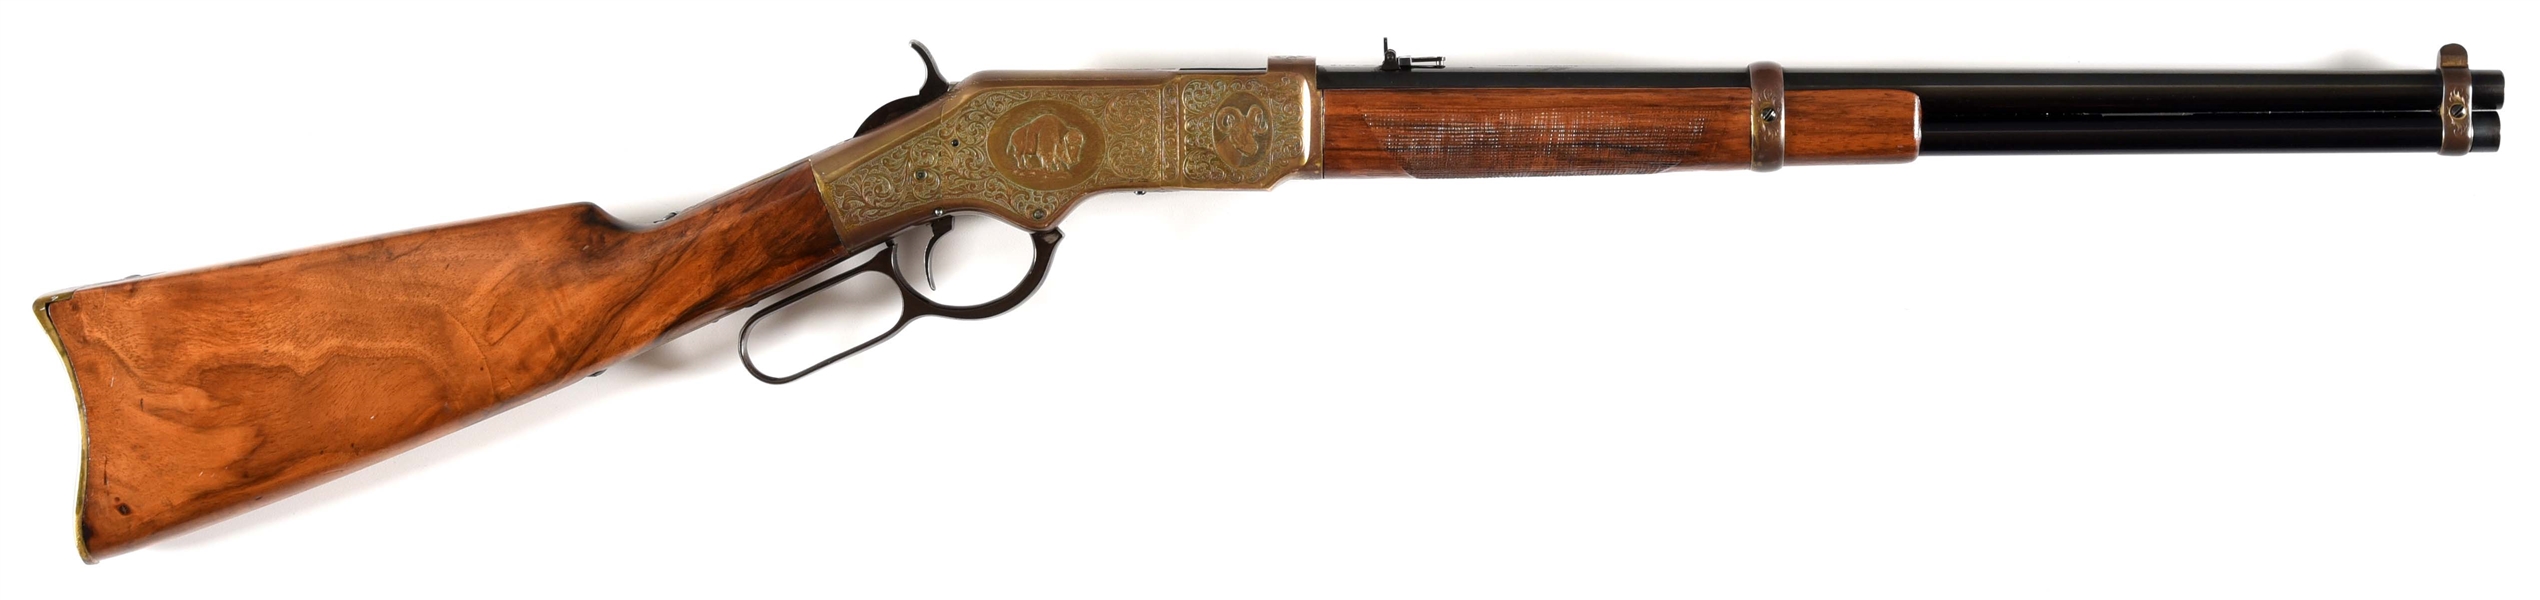 (M) GUSTAVE YOUNG TRIBUTE ENGRAVED WESTERN ARMS MODEL 1866 RIFLE.